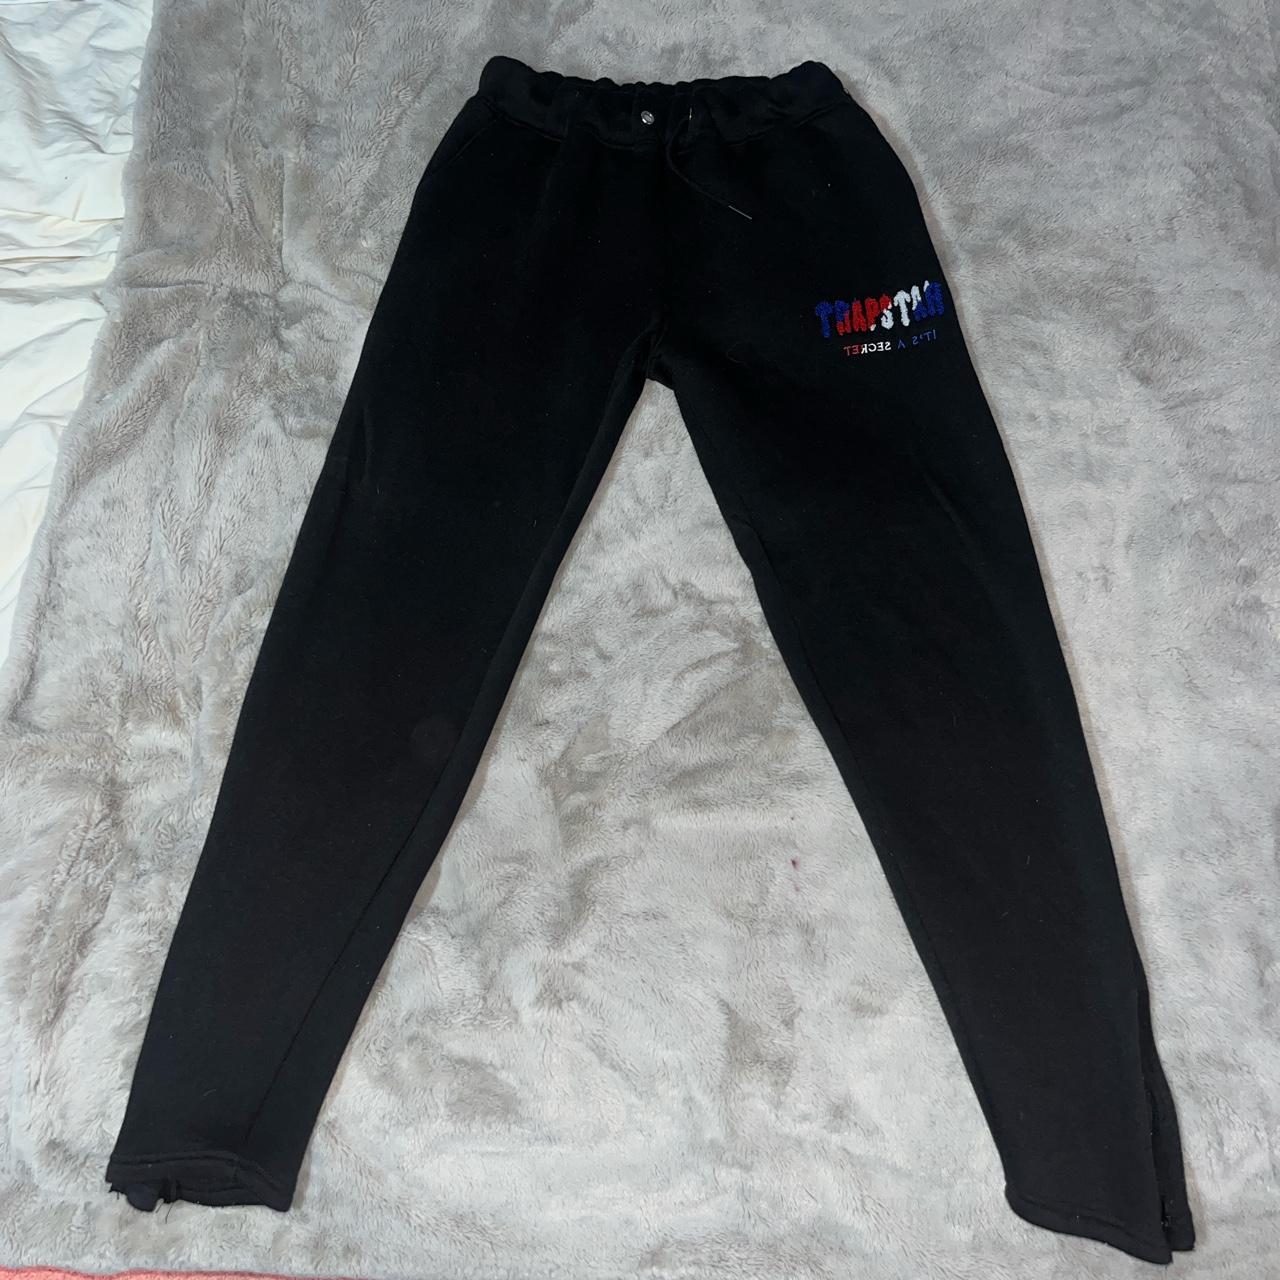 Trapstar joggers in a size large - Depop